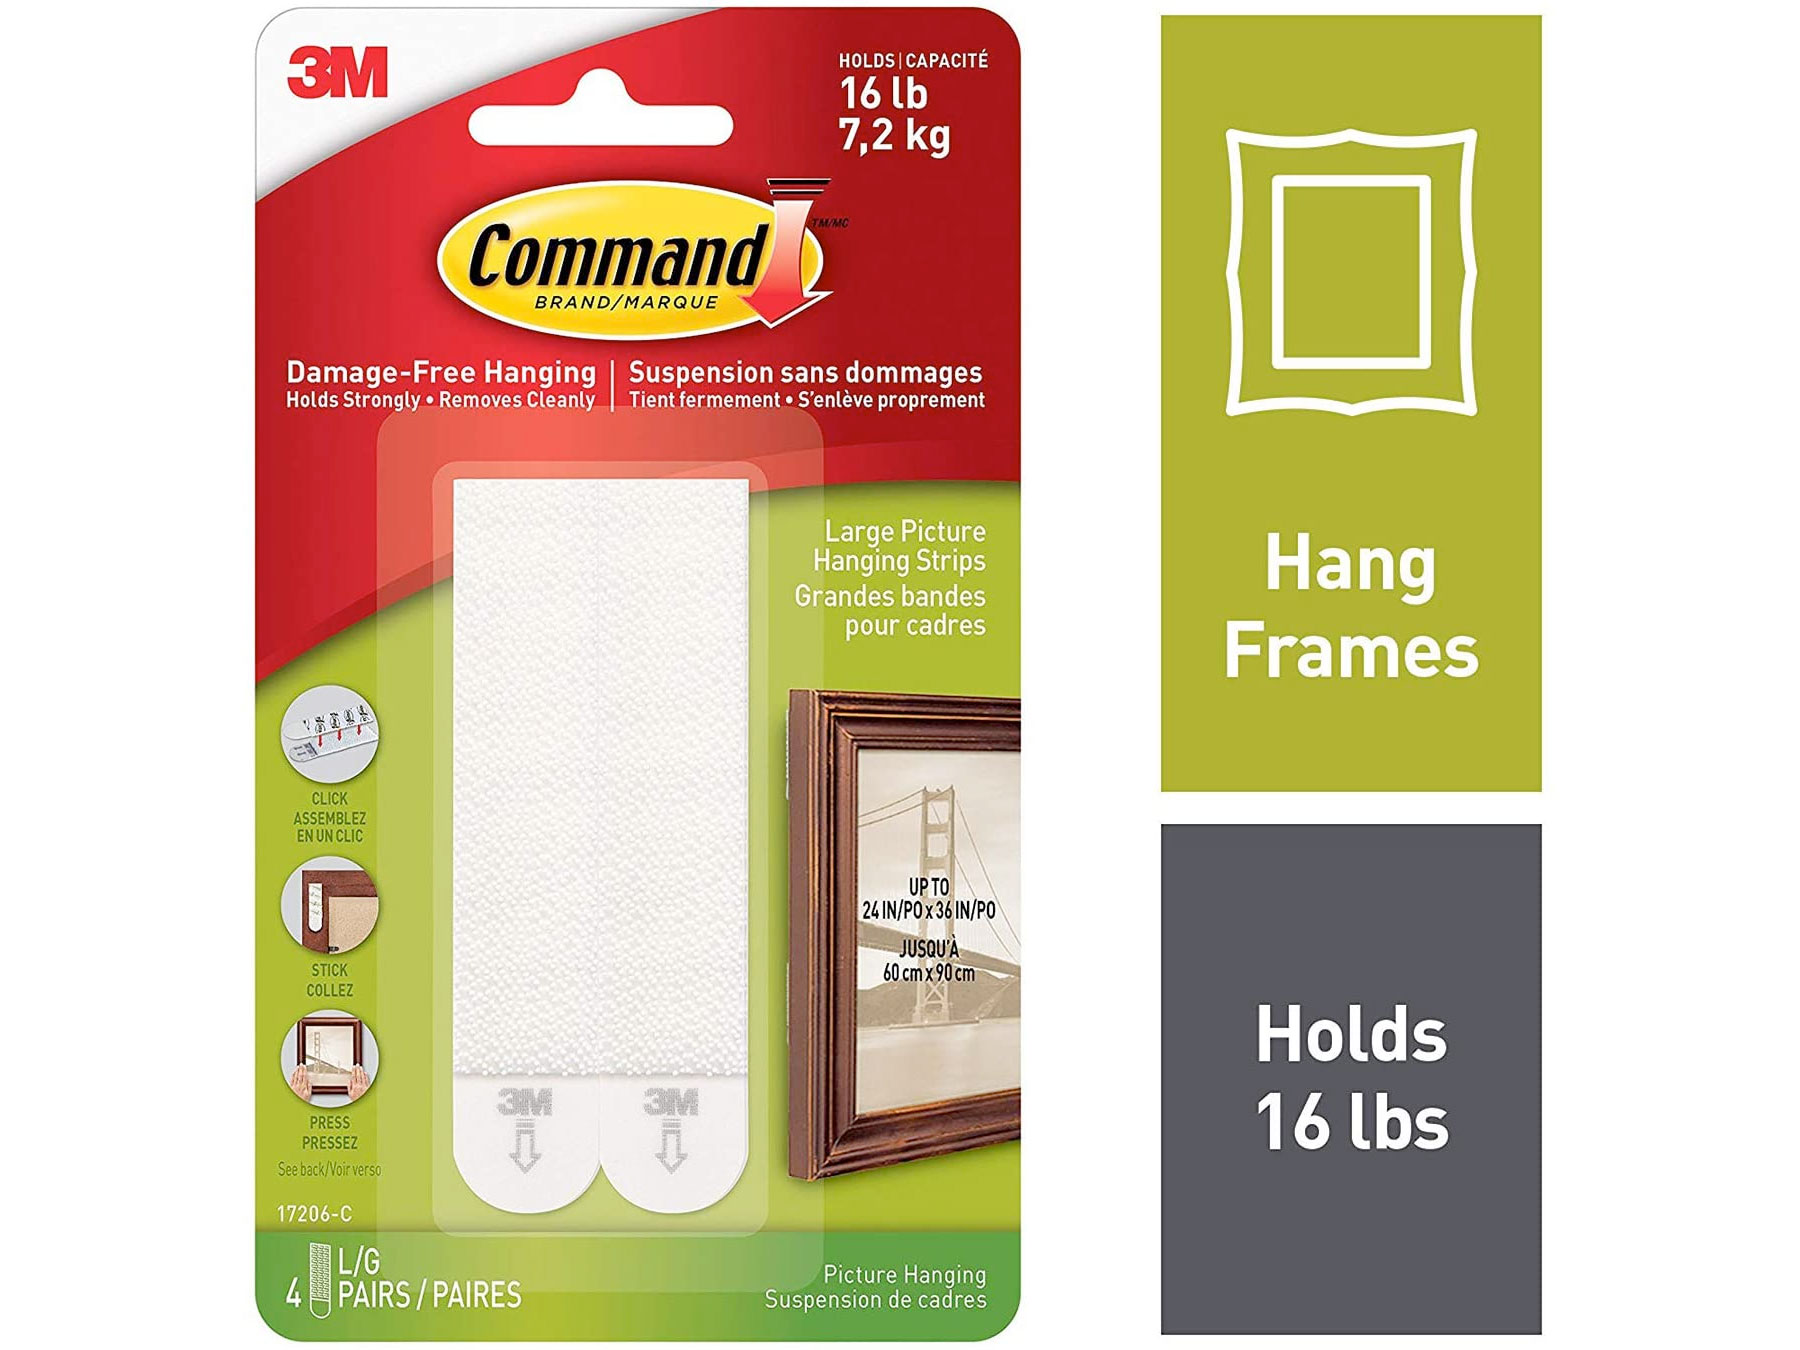 Amazon：3M Large Picture Hanging Strips(4 Pairs)只卖$1.50